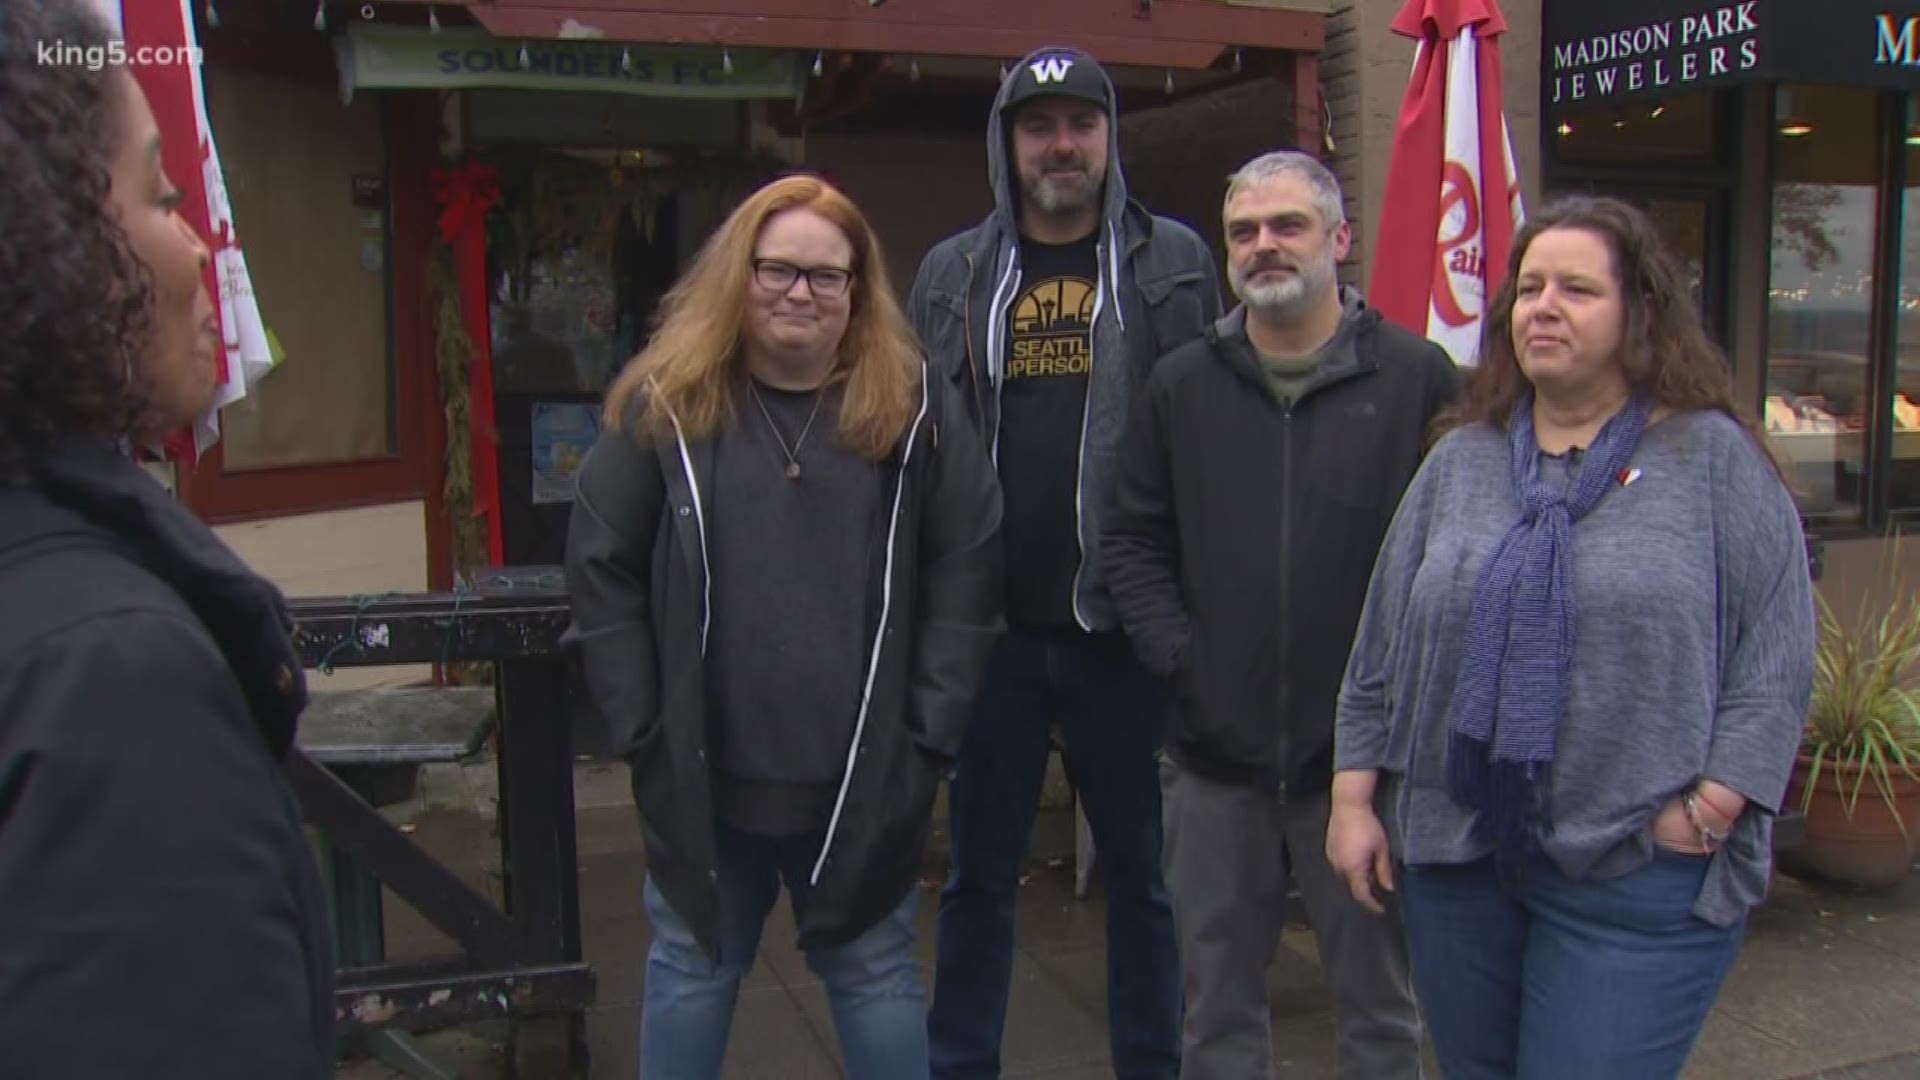 The iconic bar, The Attic, in Madison Park suddenly closed recently, leaving its employees out of a job. But now, faithful customers are raising money to help out.